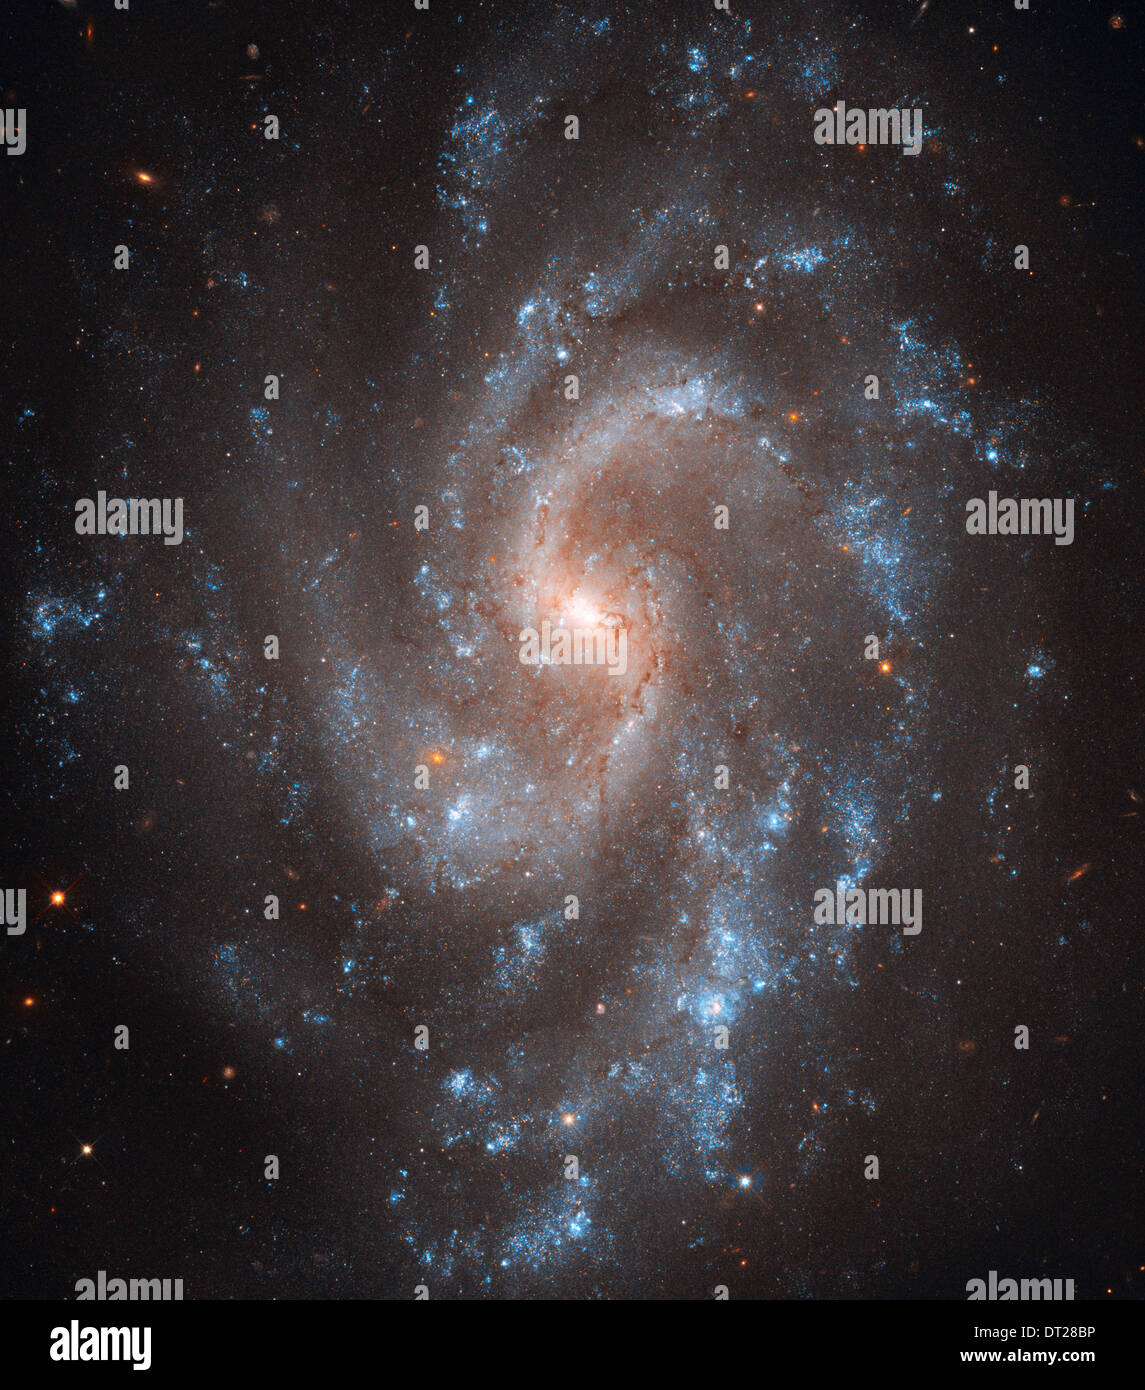 The brilliant, blue glow of young stars traces the graceful spiral arms of galaxy NGC 5584 in this Hubble Space Telescope image. Stock Photo